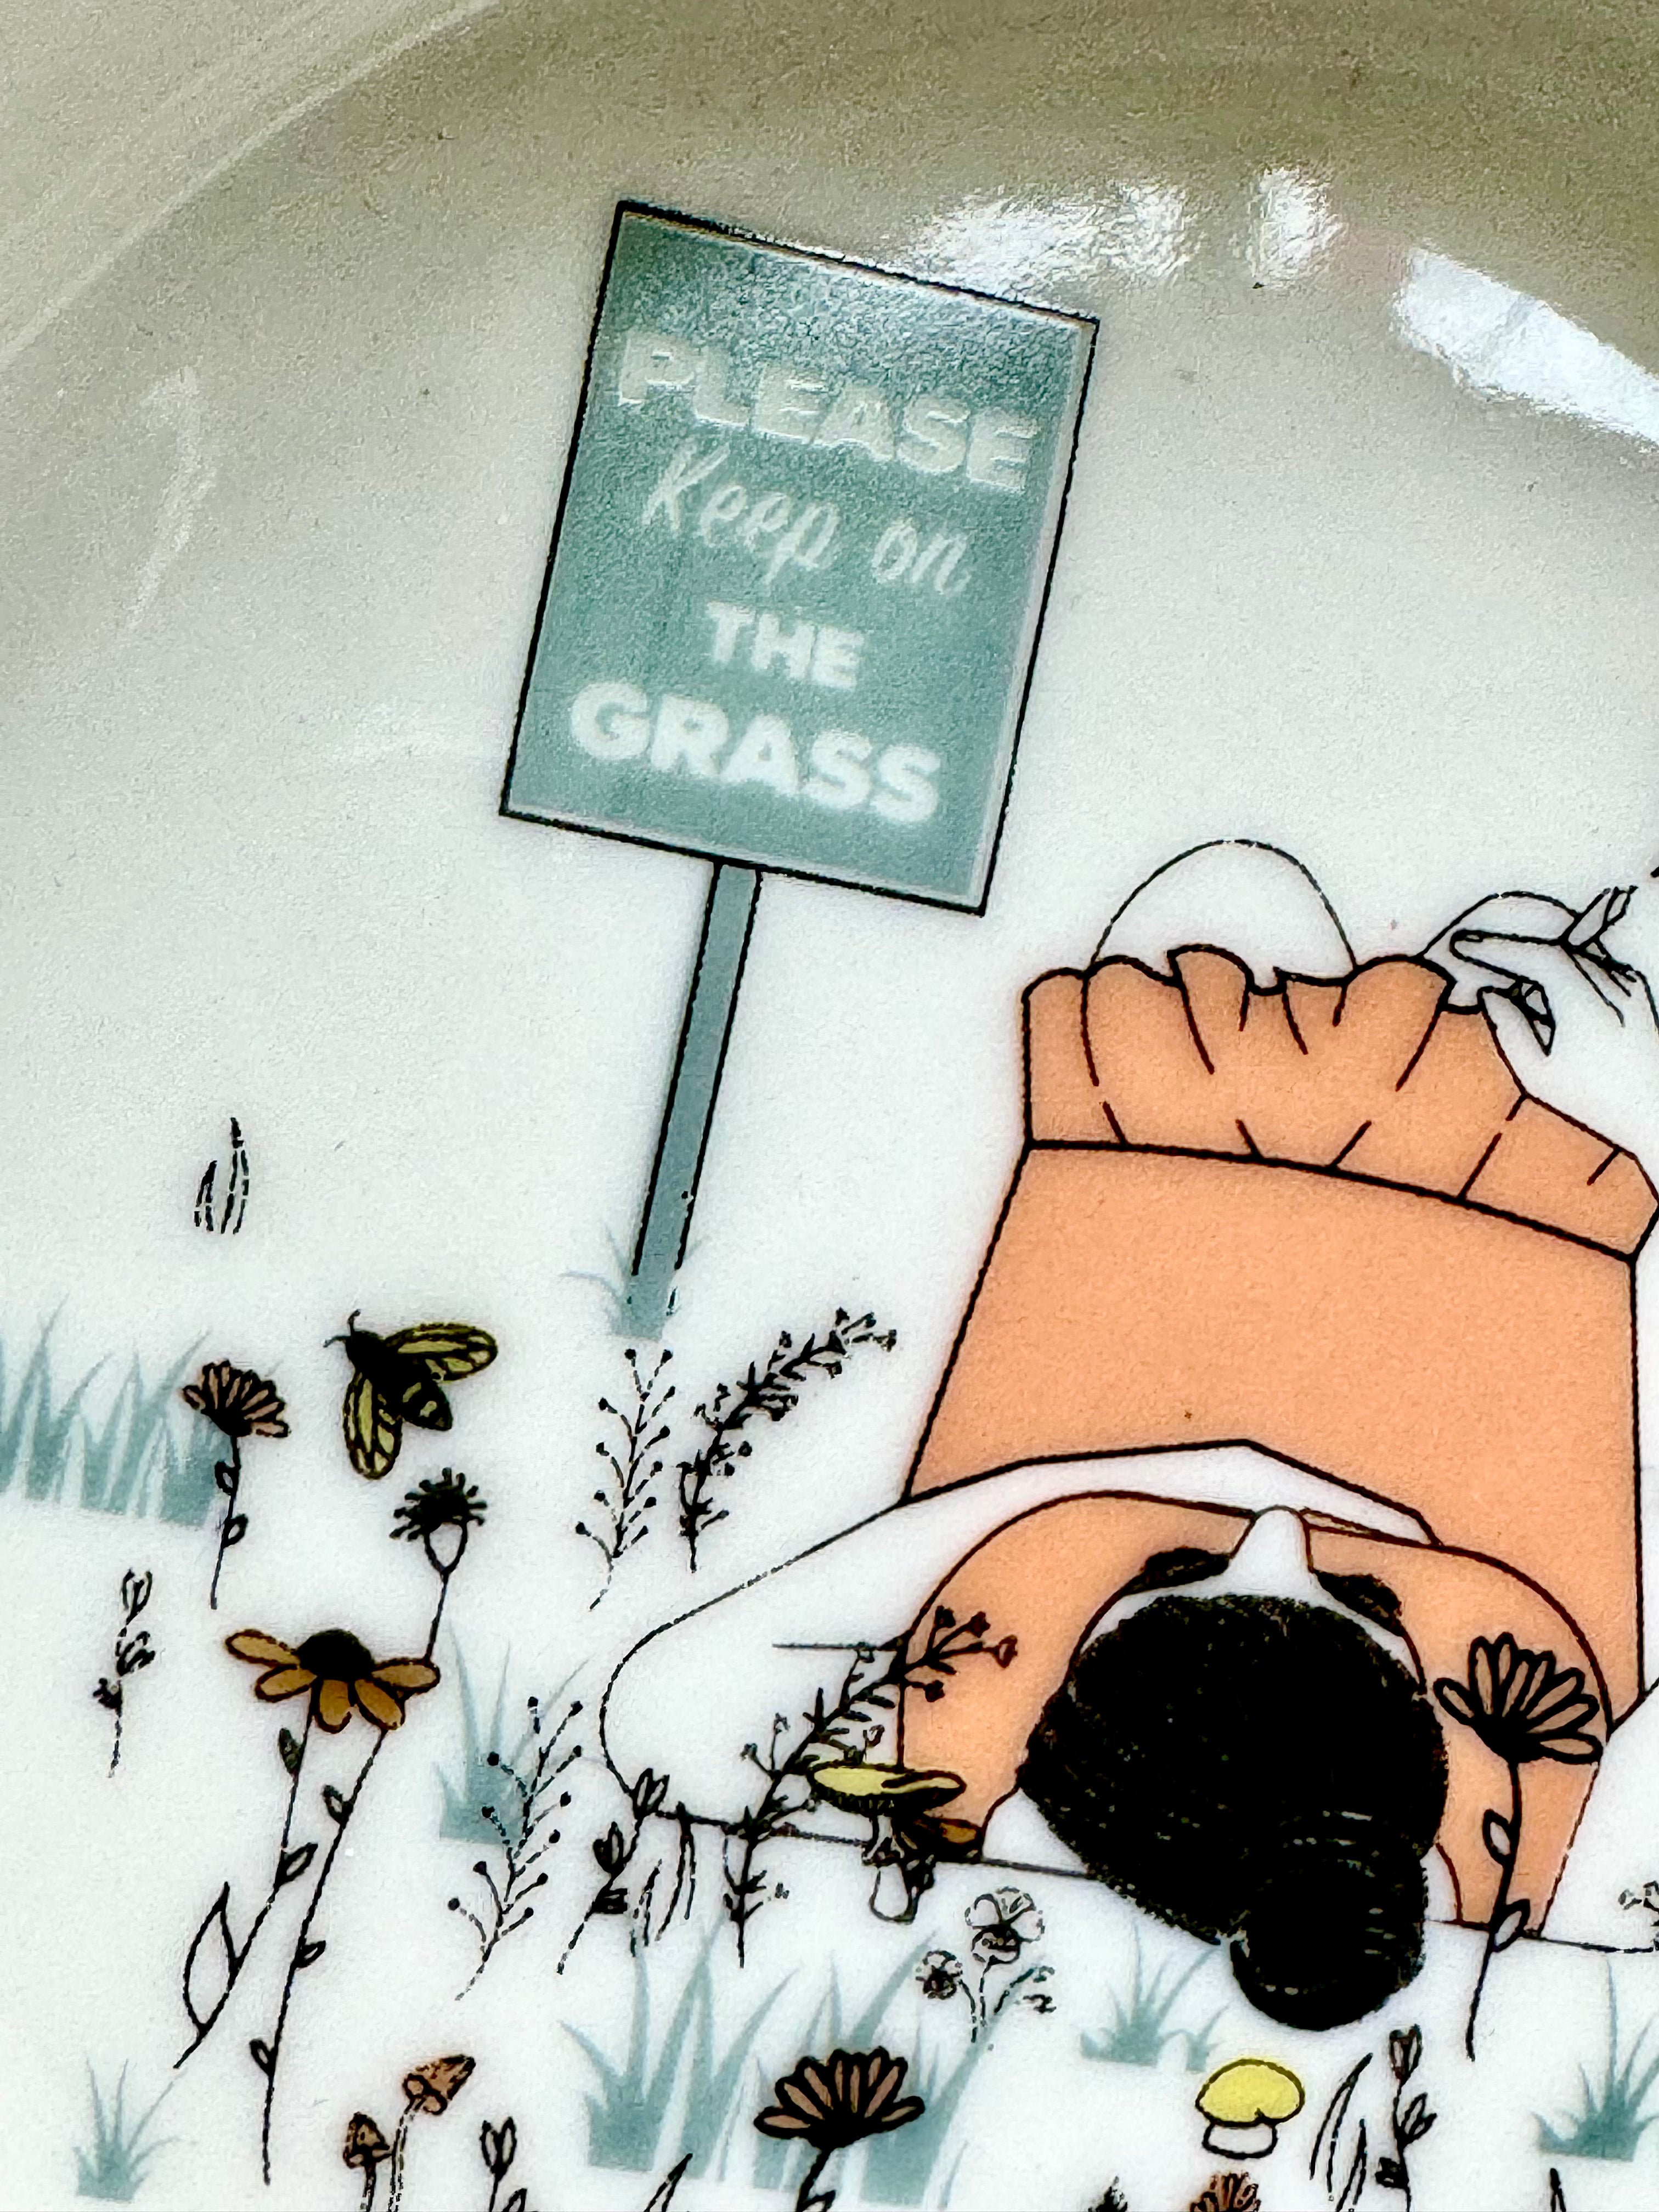 Rogue Paq Porcelain Ashtray: Please Keep ON The Grass